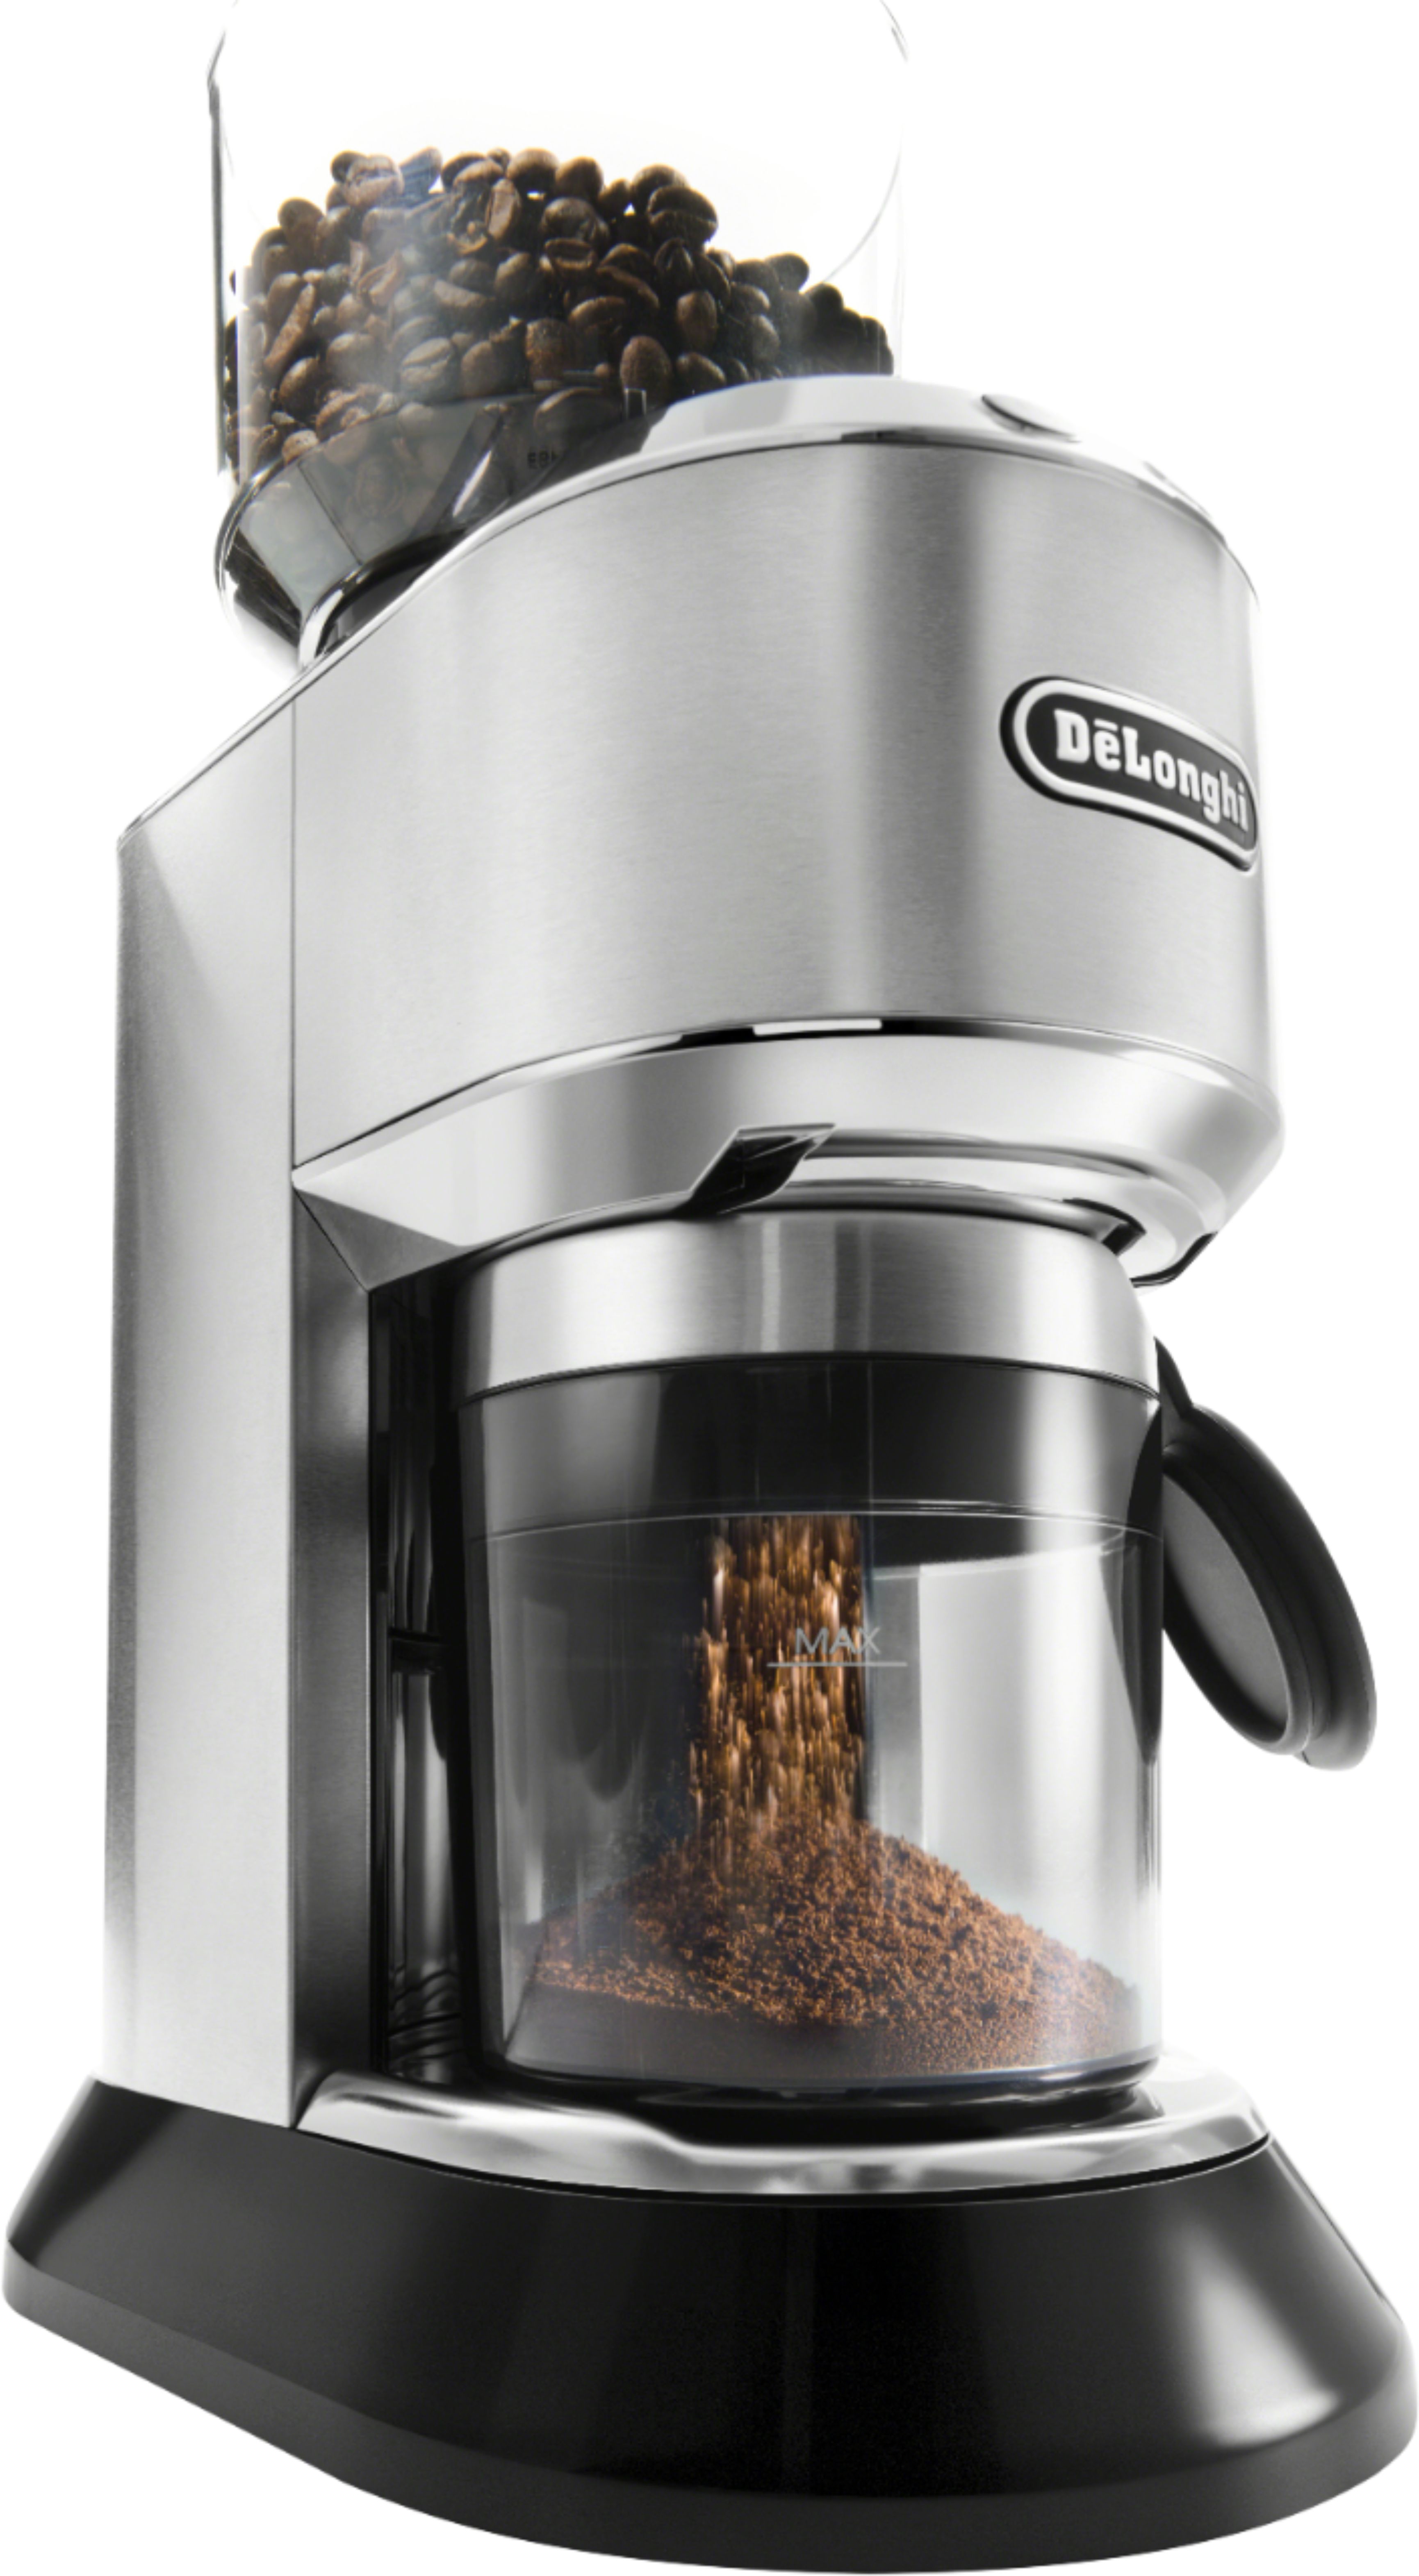 Angle View: De'Longhi - Dedica 14-Cup Coffee Grinder - Stainless steel